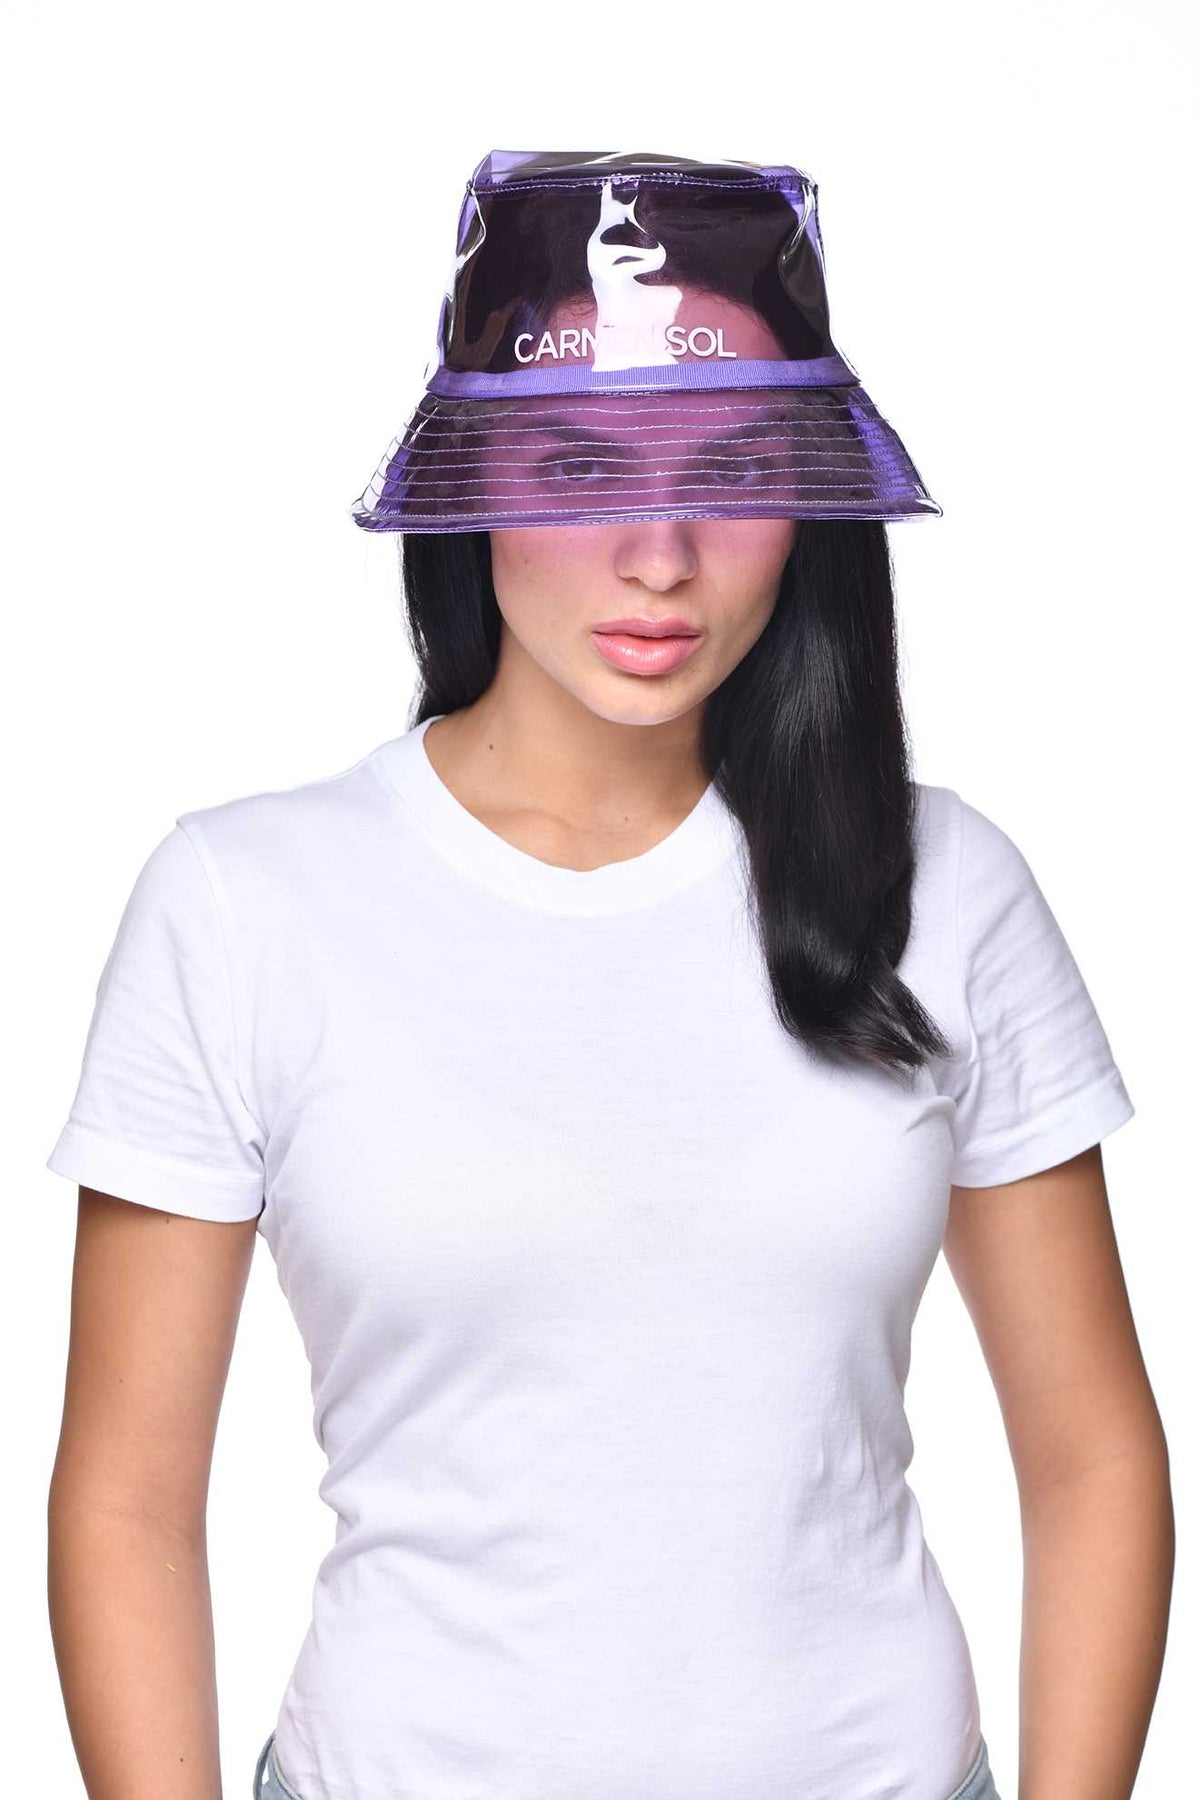 Raquel jelly bucket hat womens in color violet from Carmen Sol